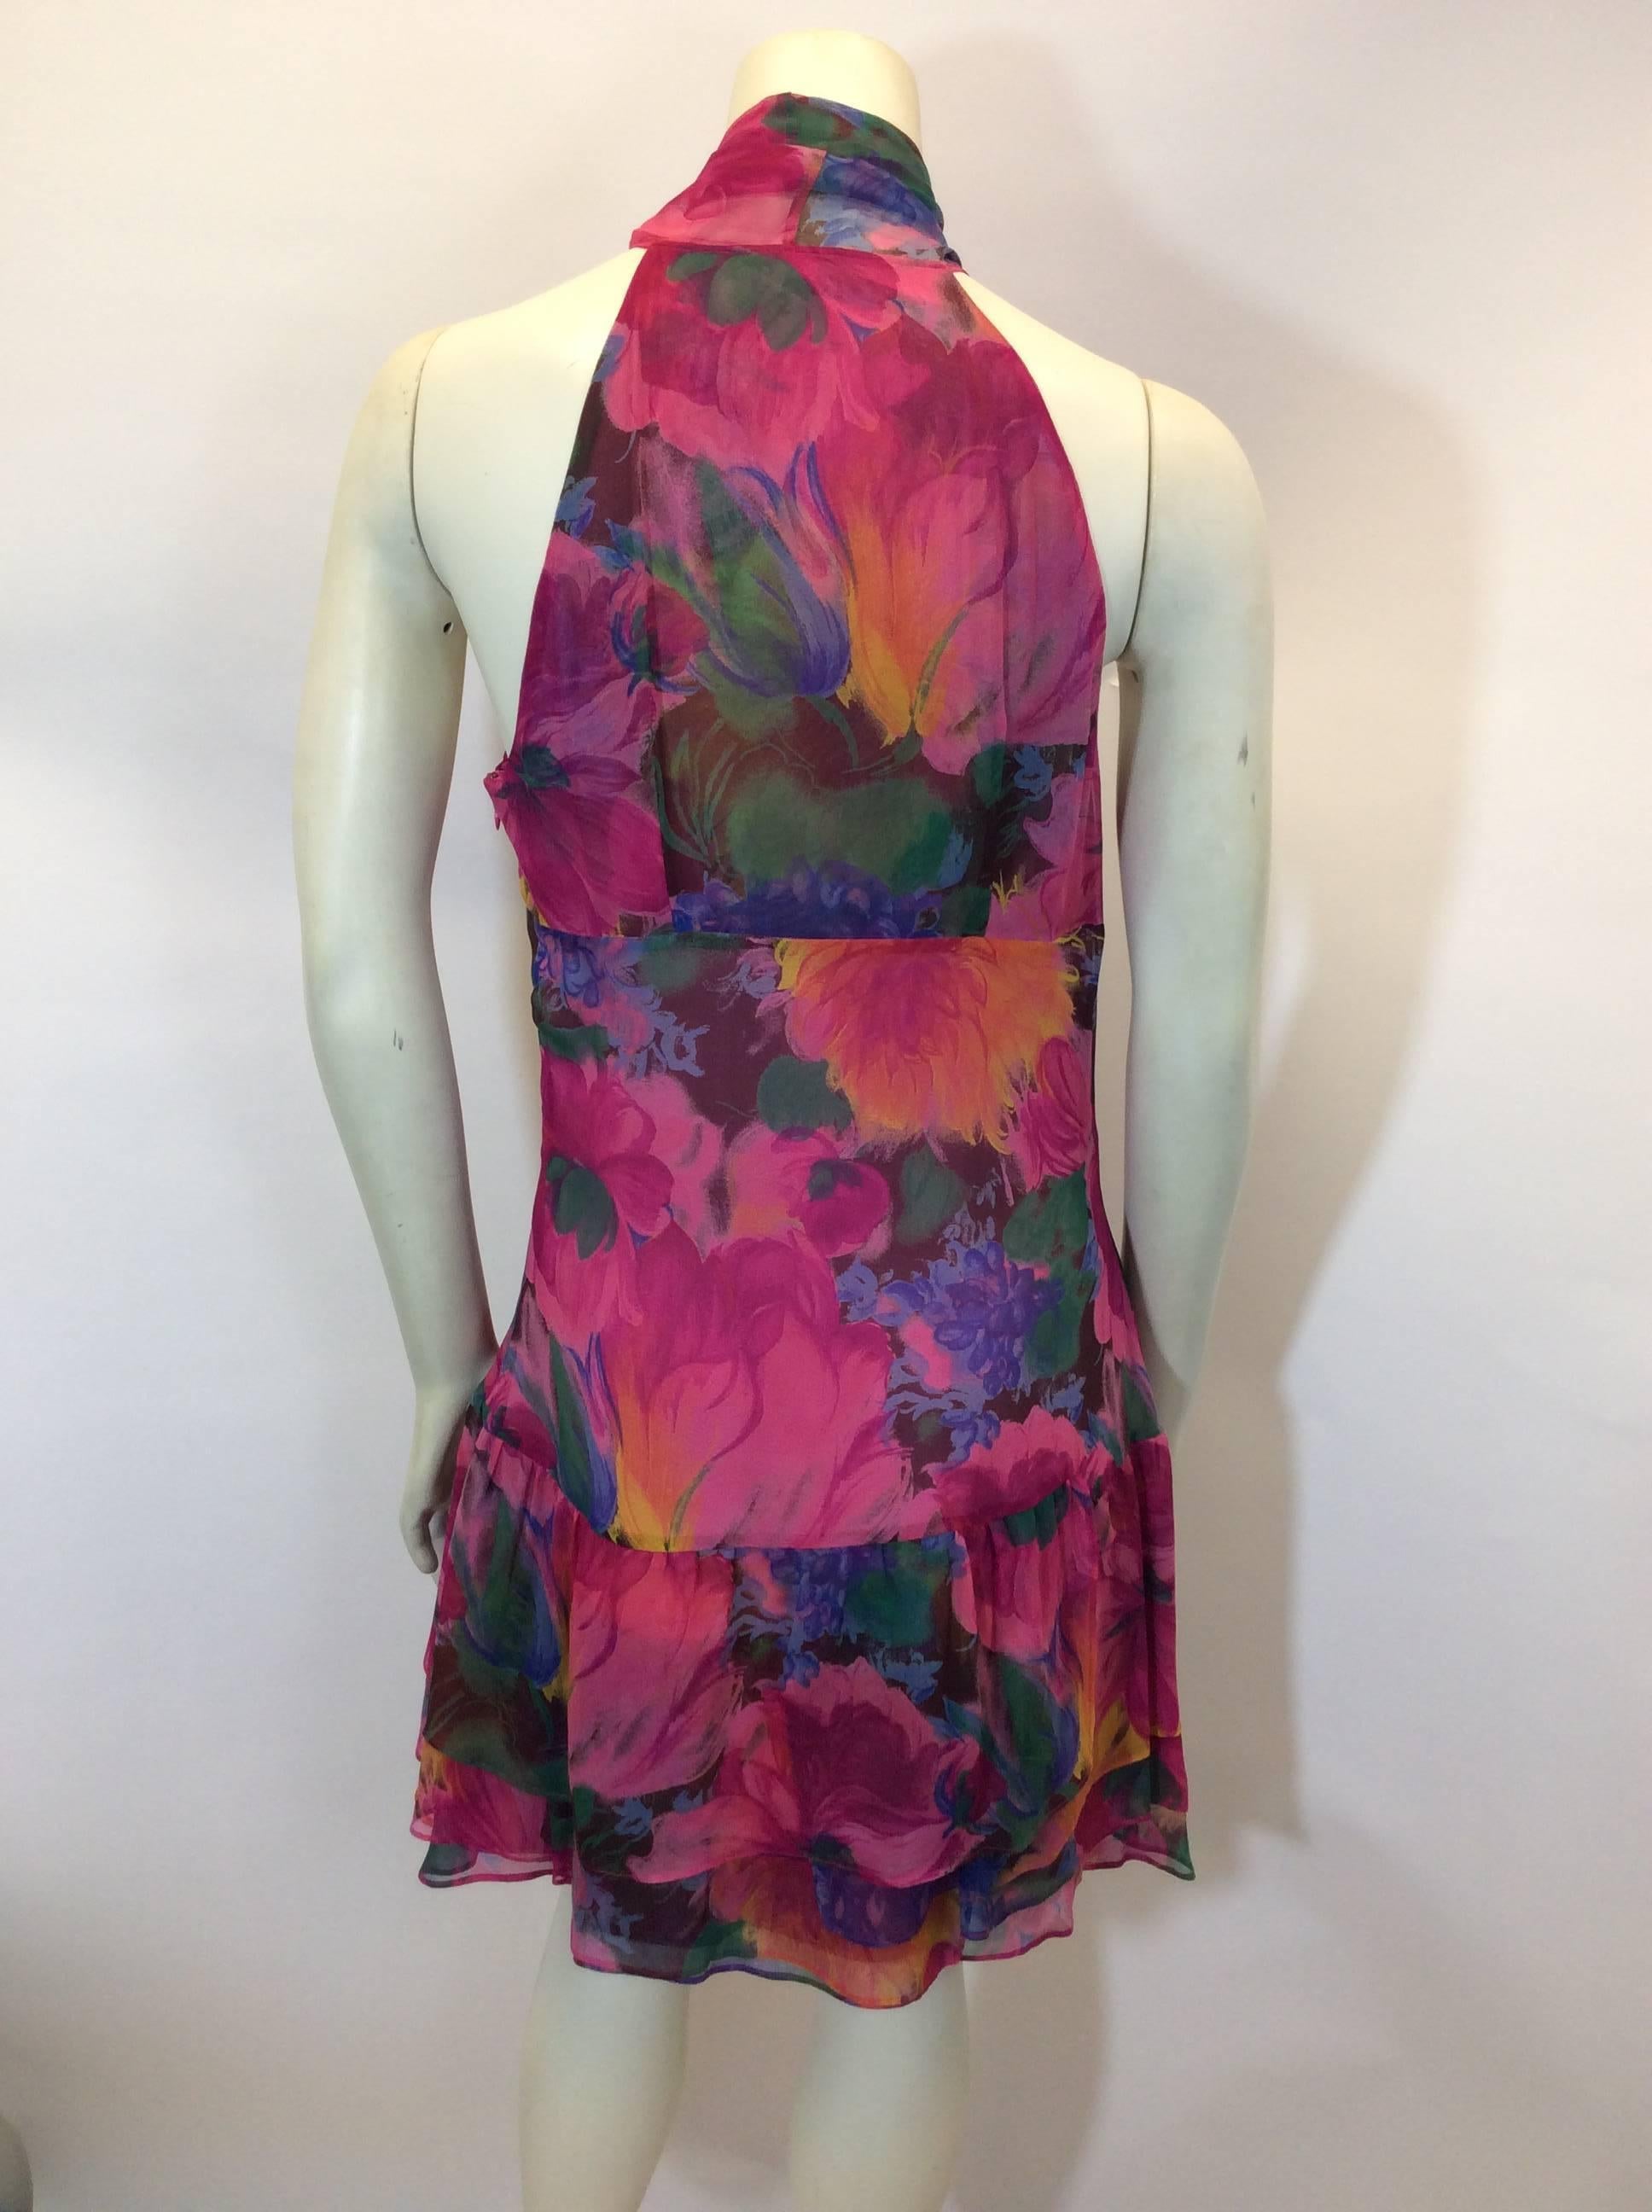 Dolce & Gabanna Floral Chiffon Ruffle Dress with Scarf In Excellent Condition For Sale In Narberth, PA